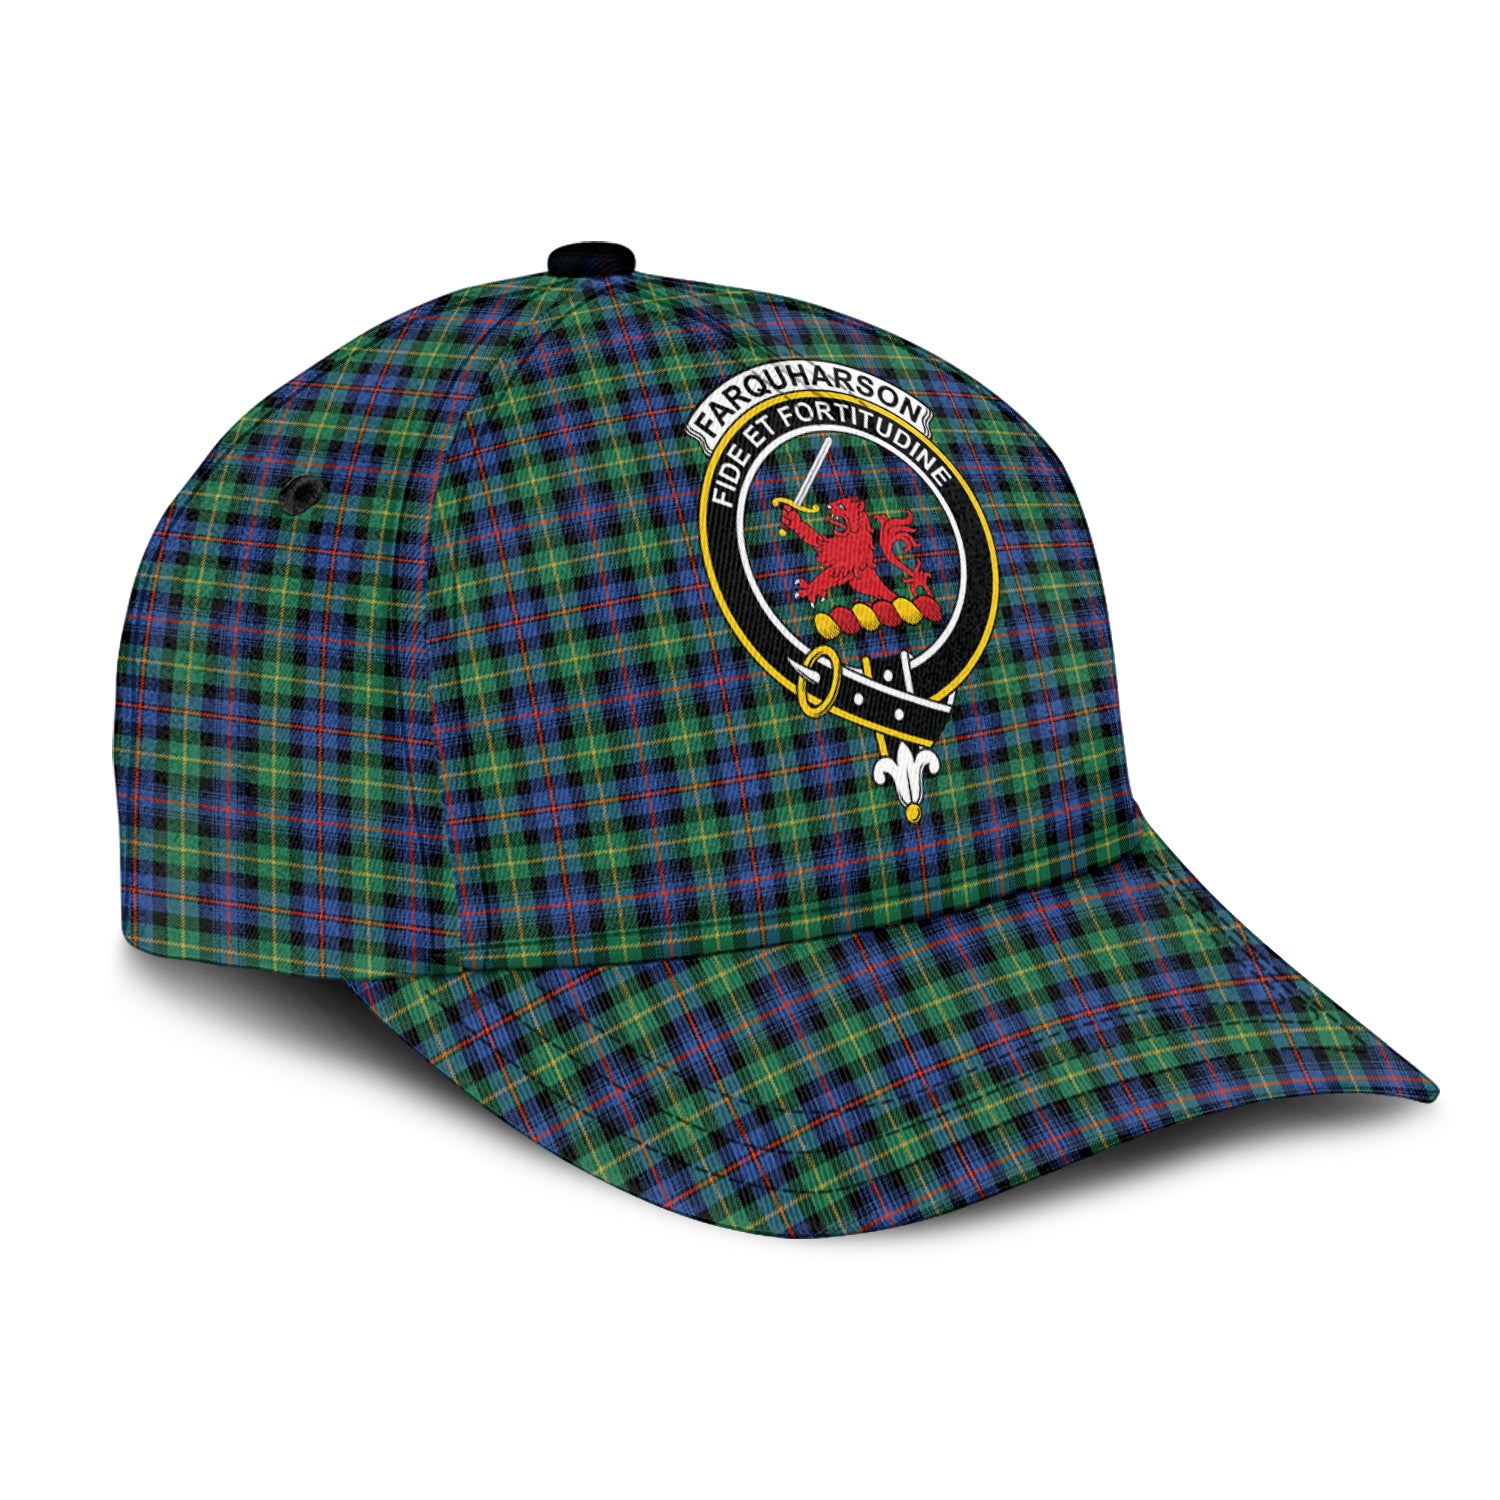 farquharson-ancient-tartan-classic-cap-with-family-crest